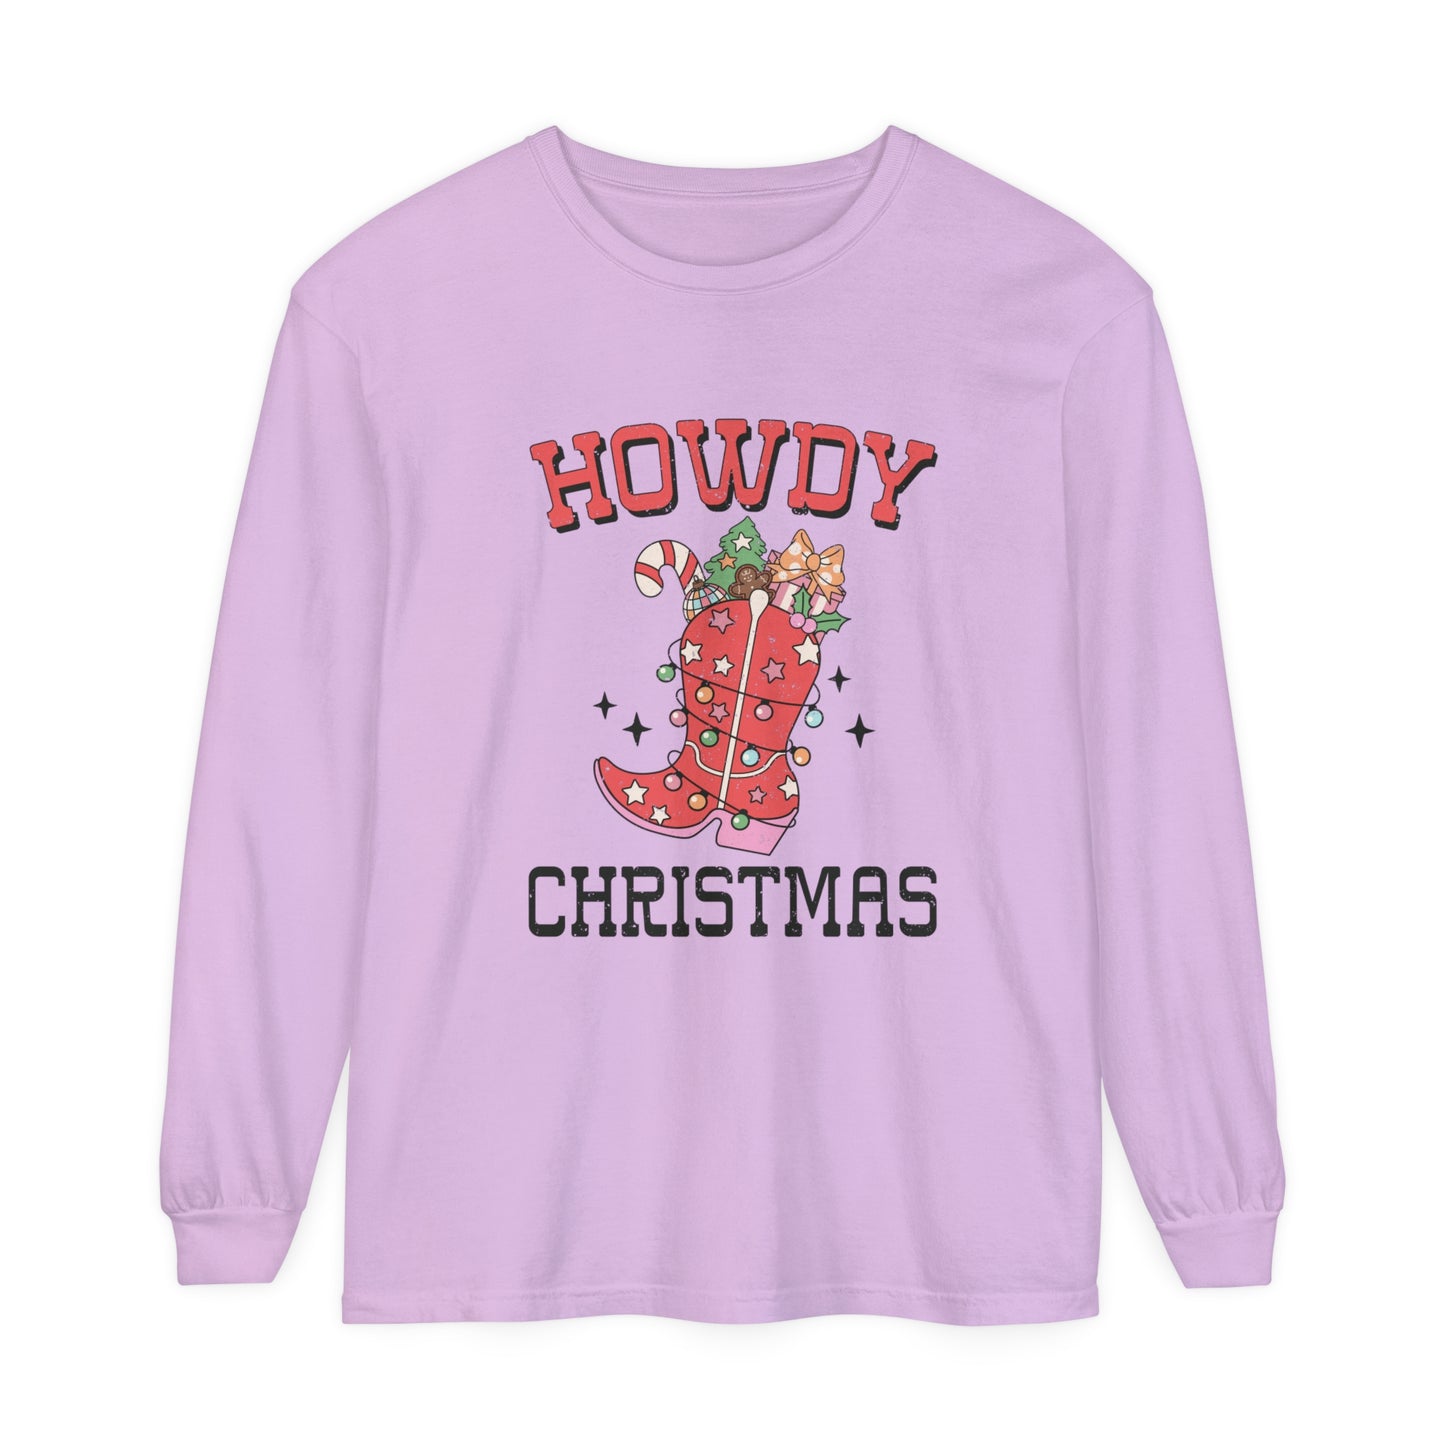 Howdy Christmas Women's Country Christmas Holiday Loose Long Sleeve T-Shirt